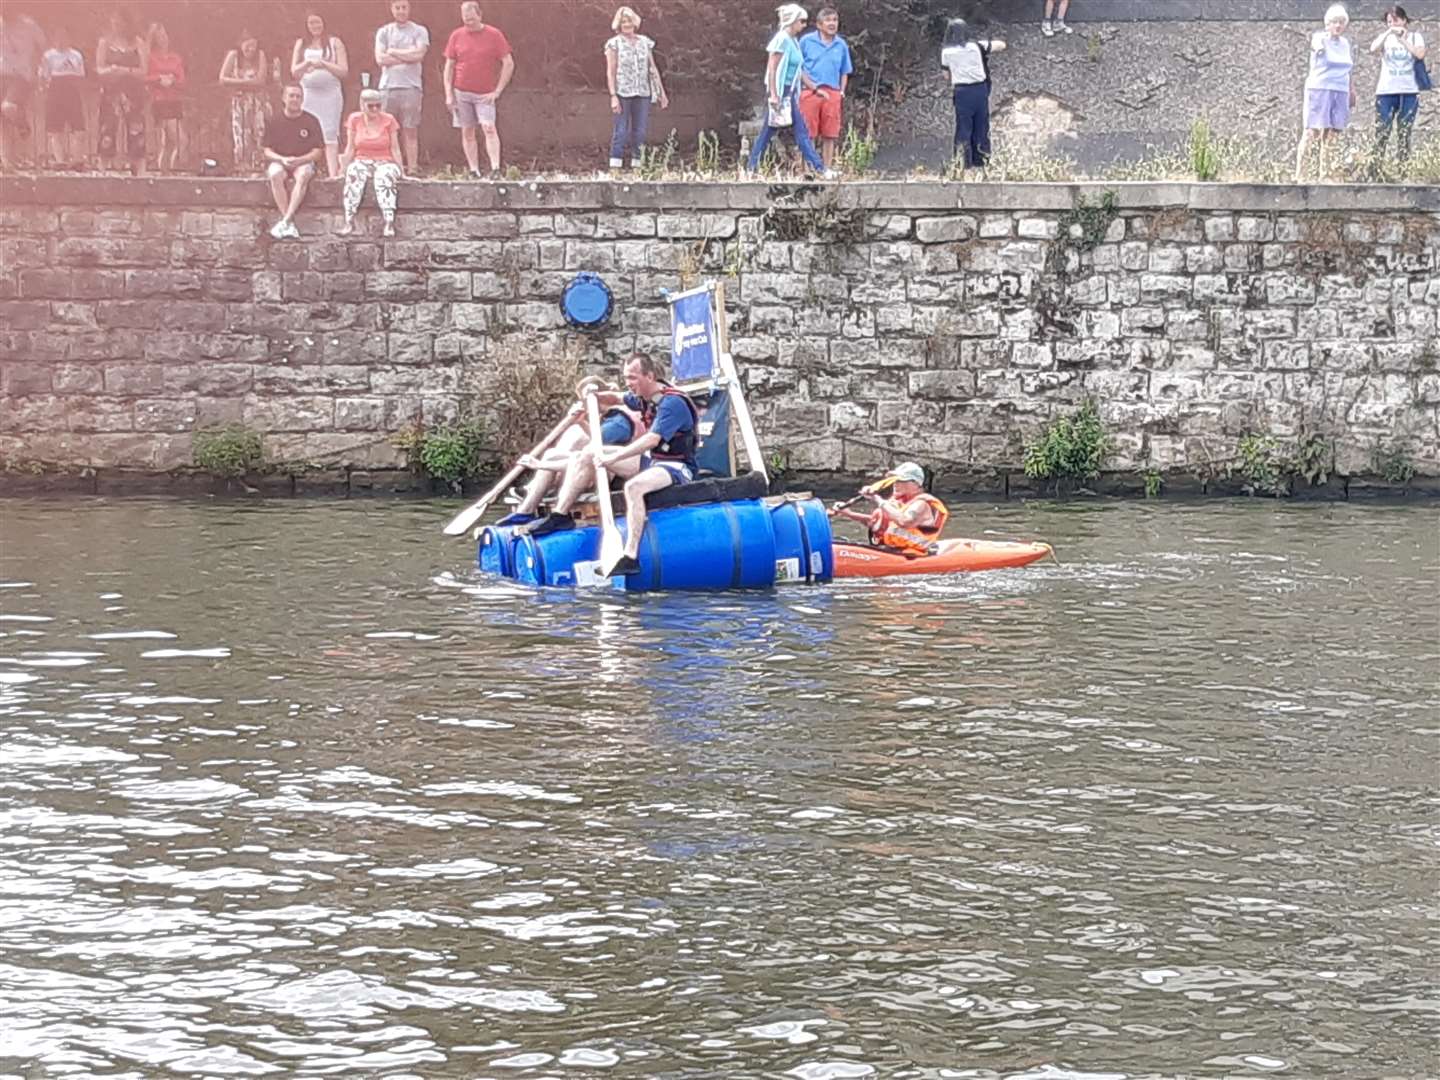 Some of the contestants in this year's raft race